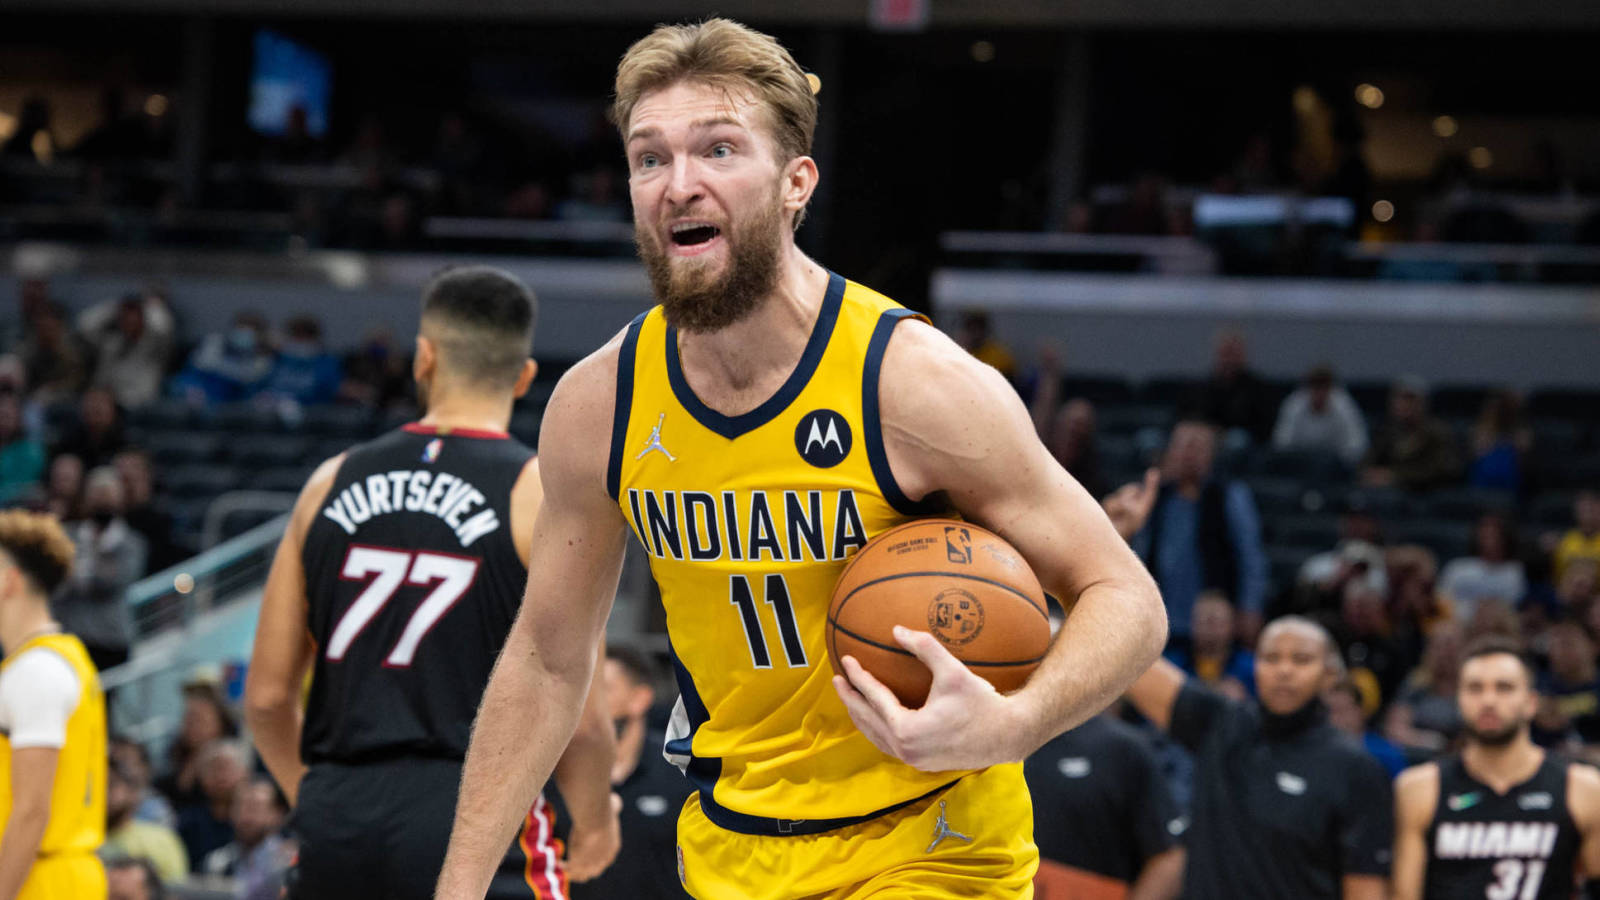 Pacers potentially move to rebuild, receptive to trade talks on Caris  LeVert, Domantas Sabonis, Myles Turner: Sources - The Athletic